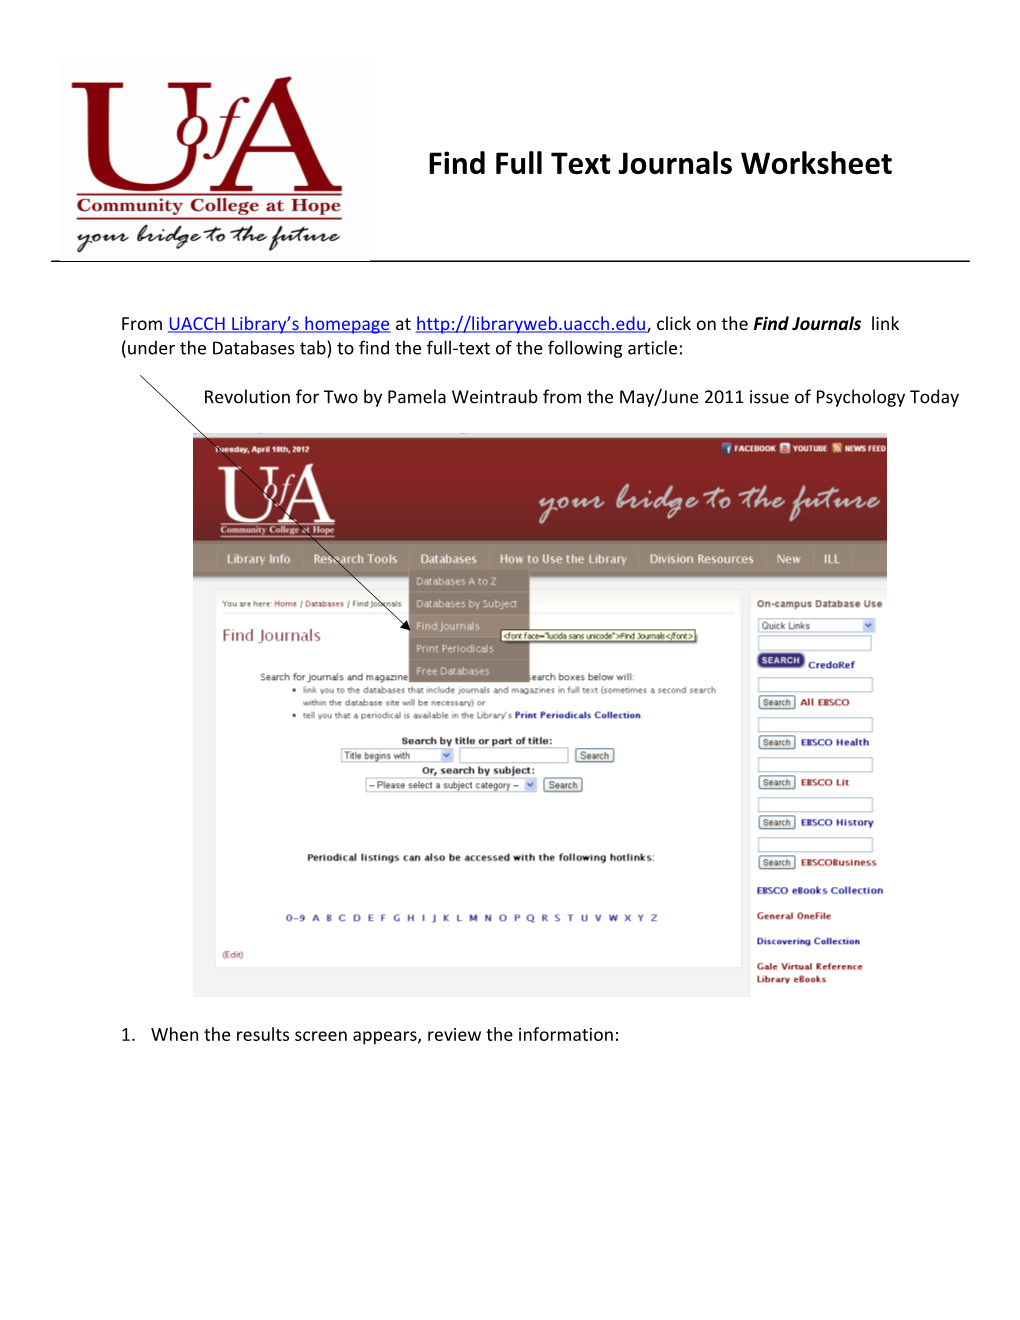 From UACCH Library S Homepage at Click on the Find Journals Link